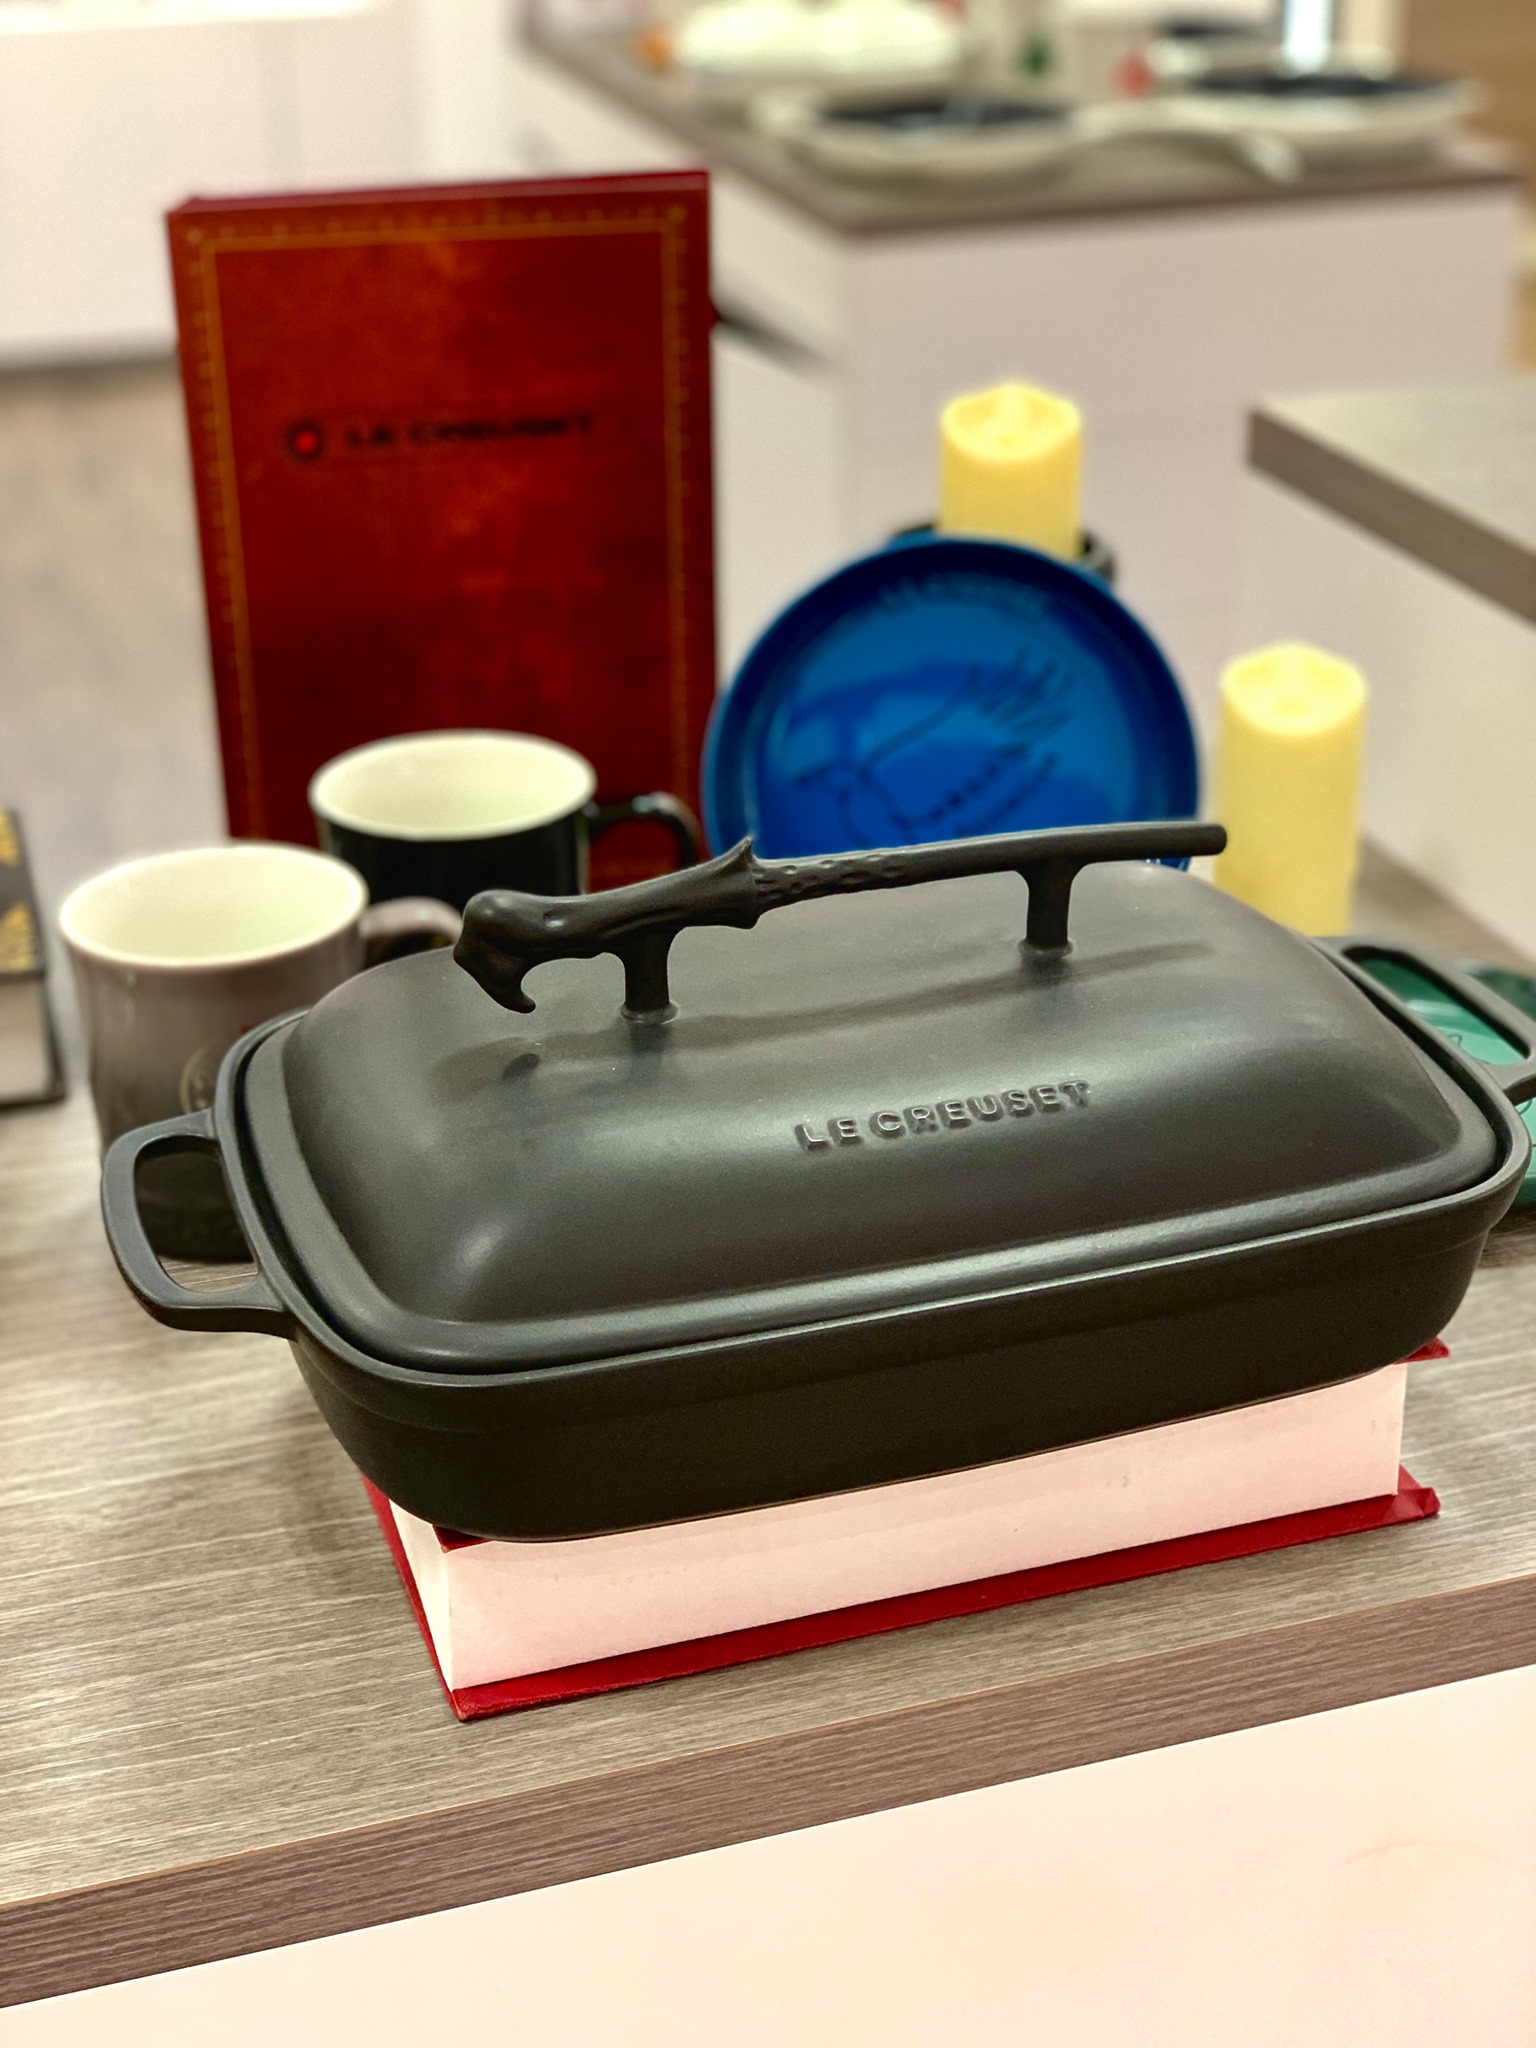 Harry Potter x Le Creuset collection now at Takashimaya S'pore, prices from  S$109 -  - News from Singapore, Asia and around the world